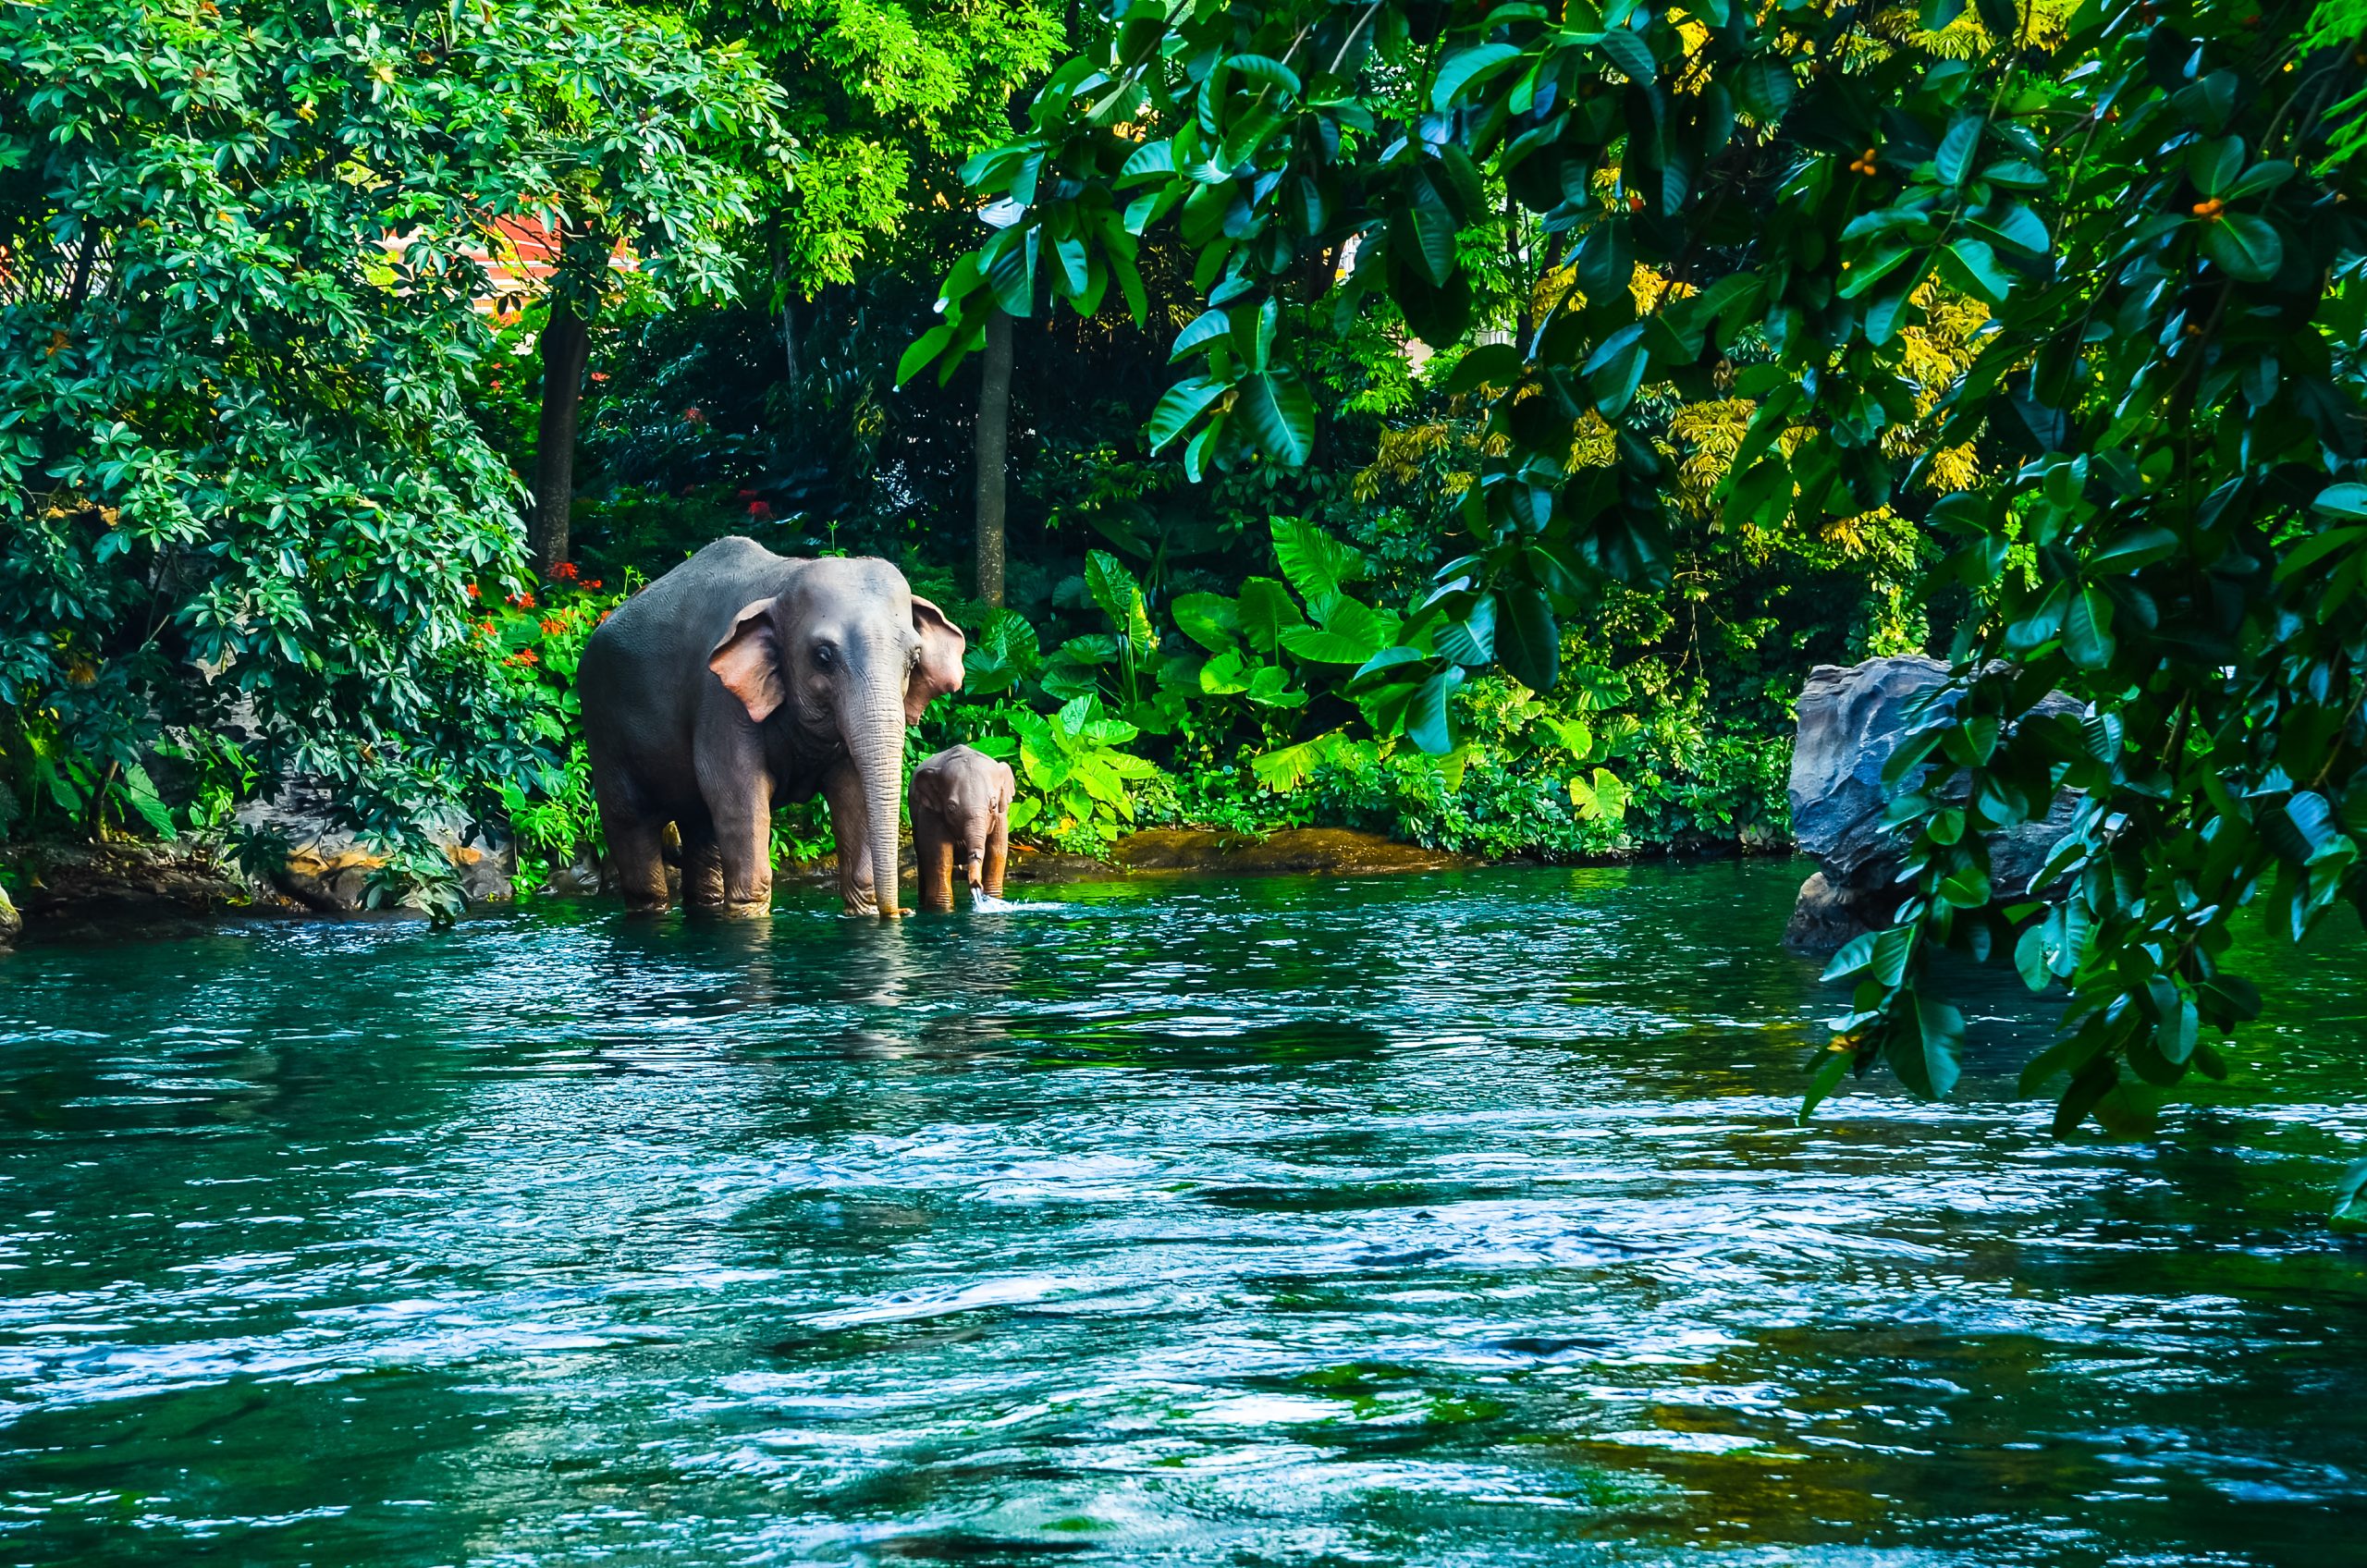 Elephant drinking water by the river